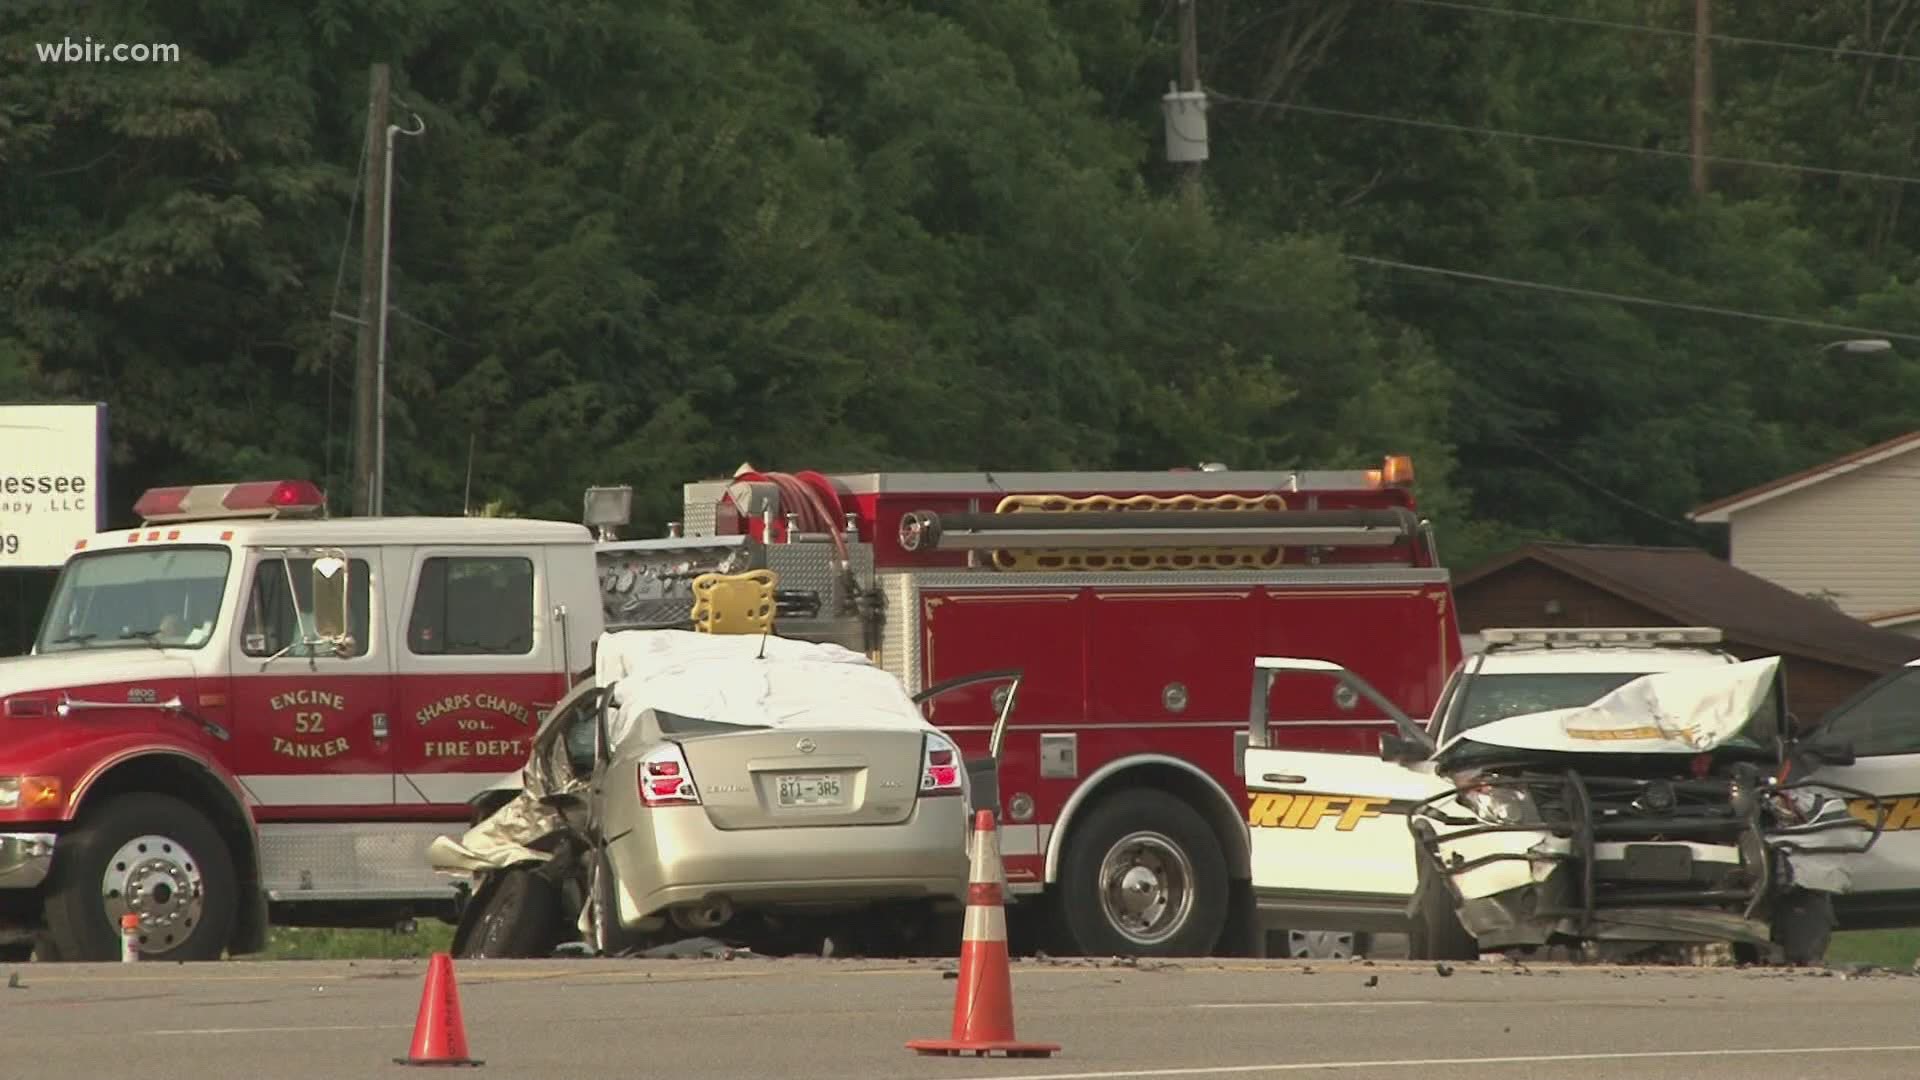 THP said a crash that killed one and injured a deputy is still under investigation.